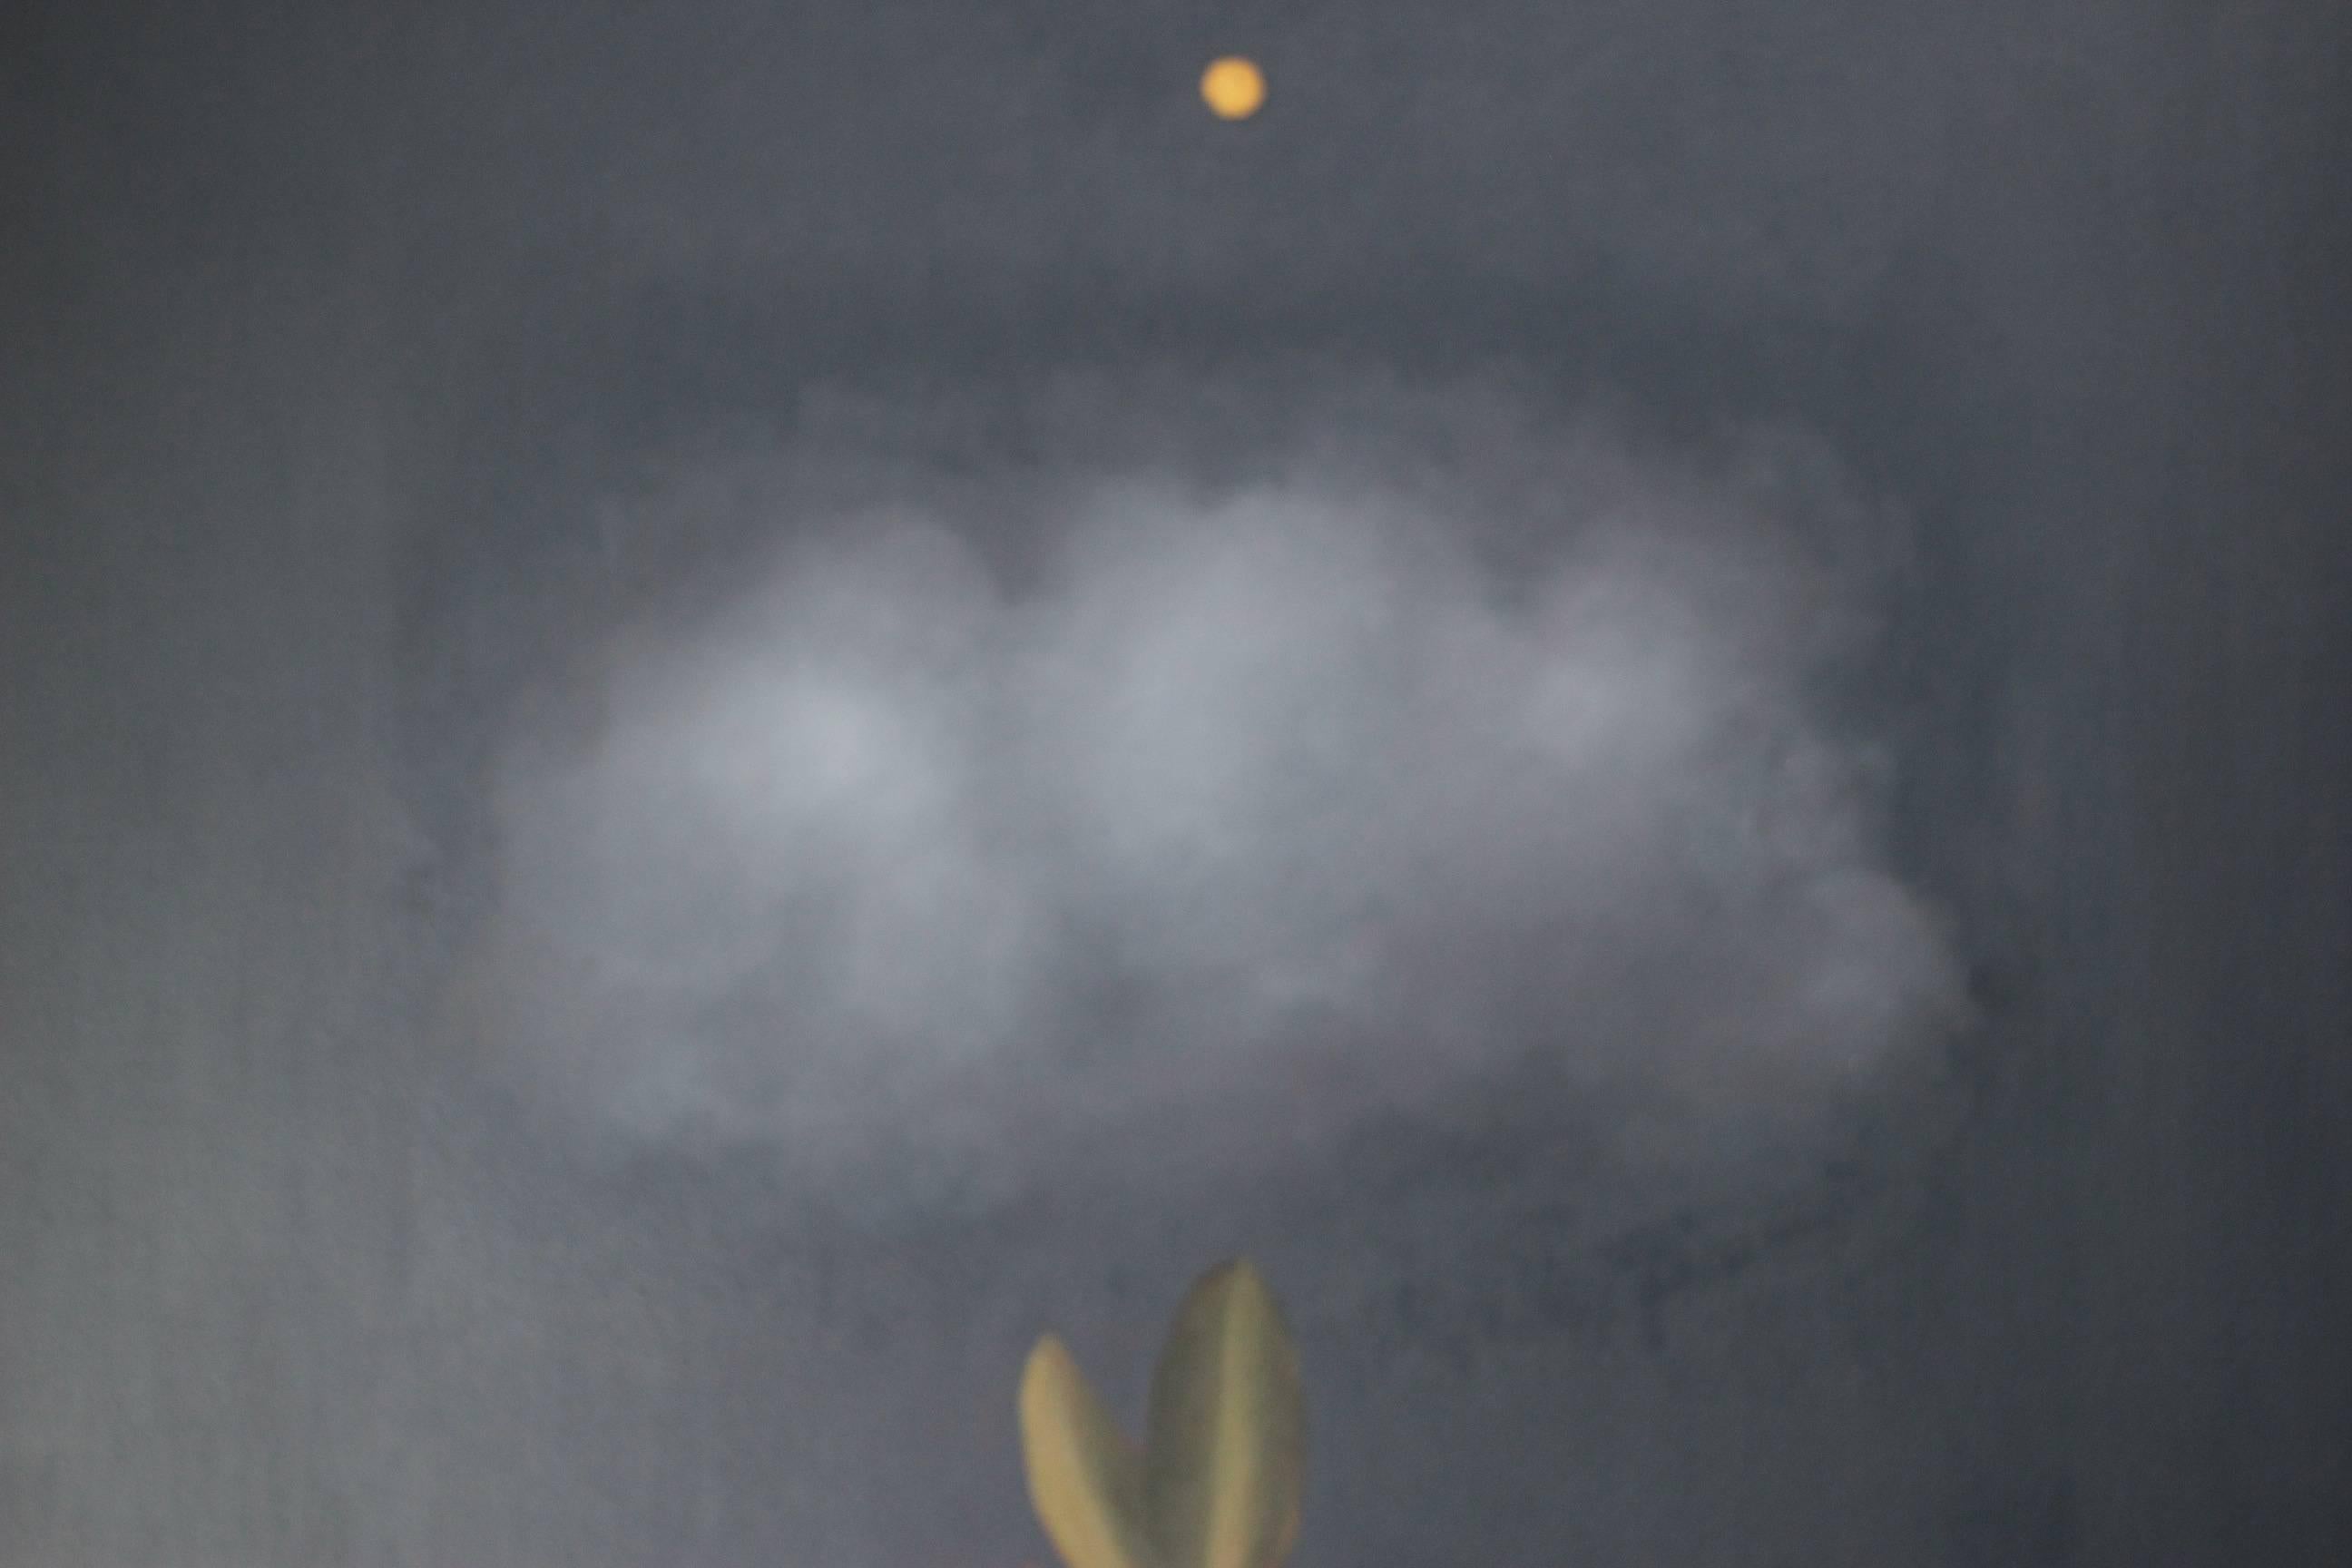 Acrylic on canvas by San Francisco artist Daniel Warth. Painting depicts a bird, a cloud and a seed and is presented unframed.